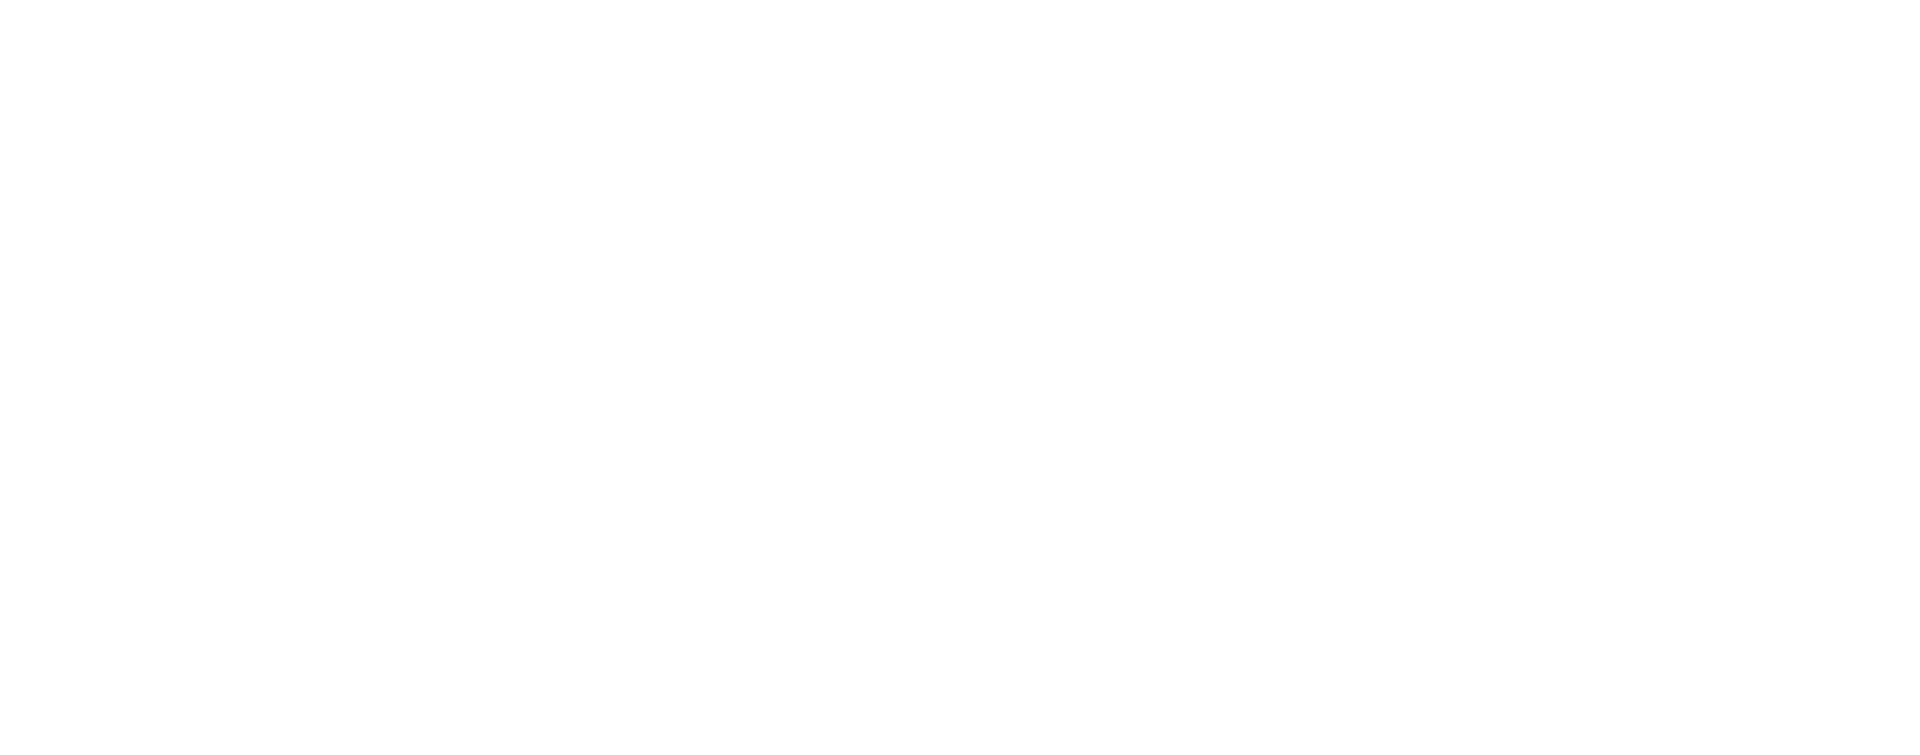 logo image of ADU homes - small homes big living in grey